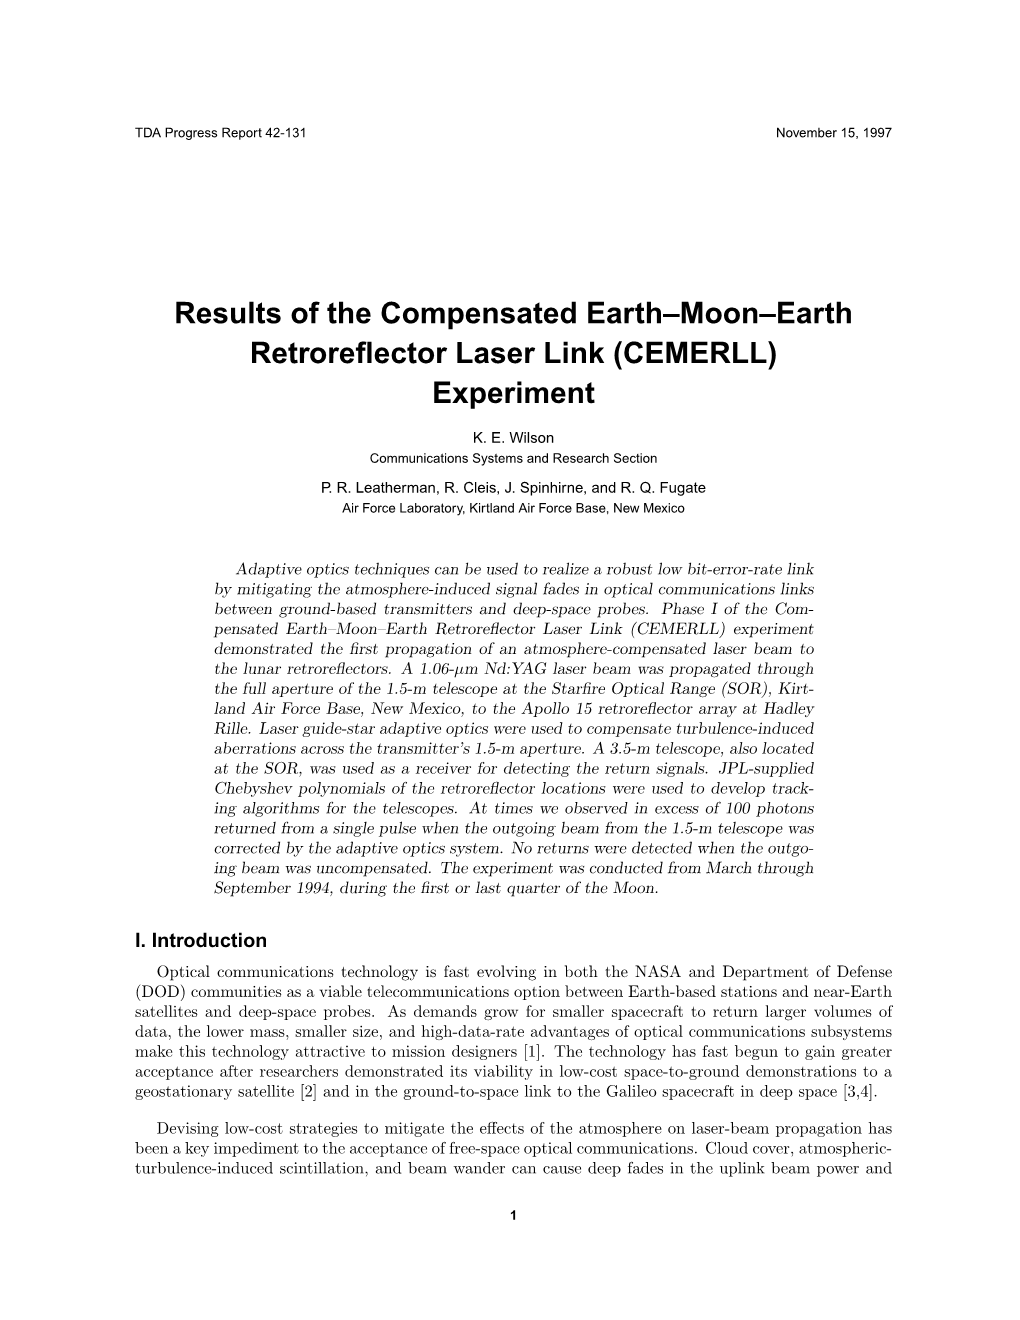 Results of the Compensated Earth–Moon–Earth Retroreflector Laser